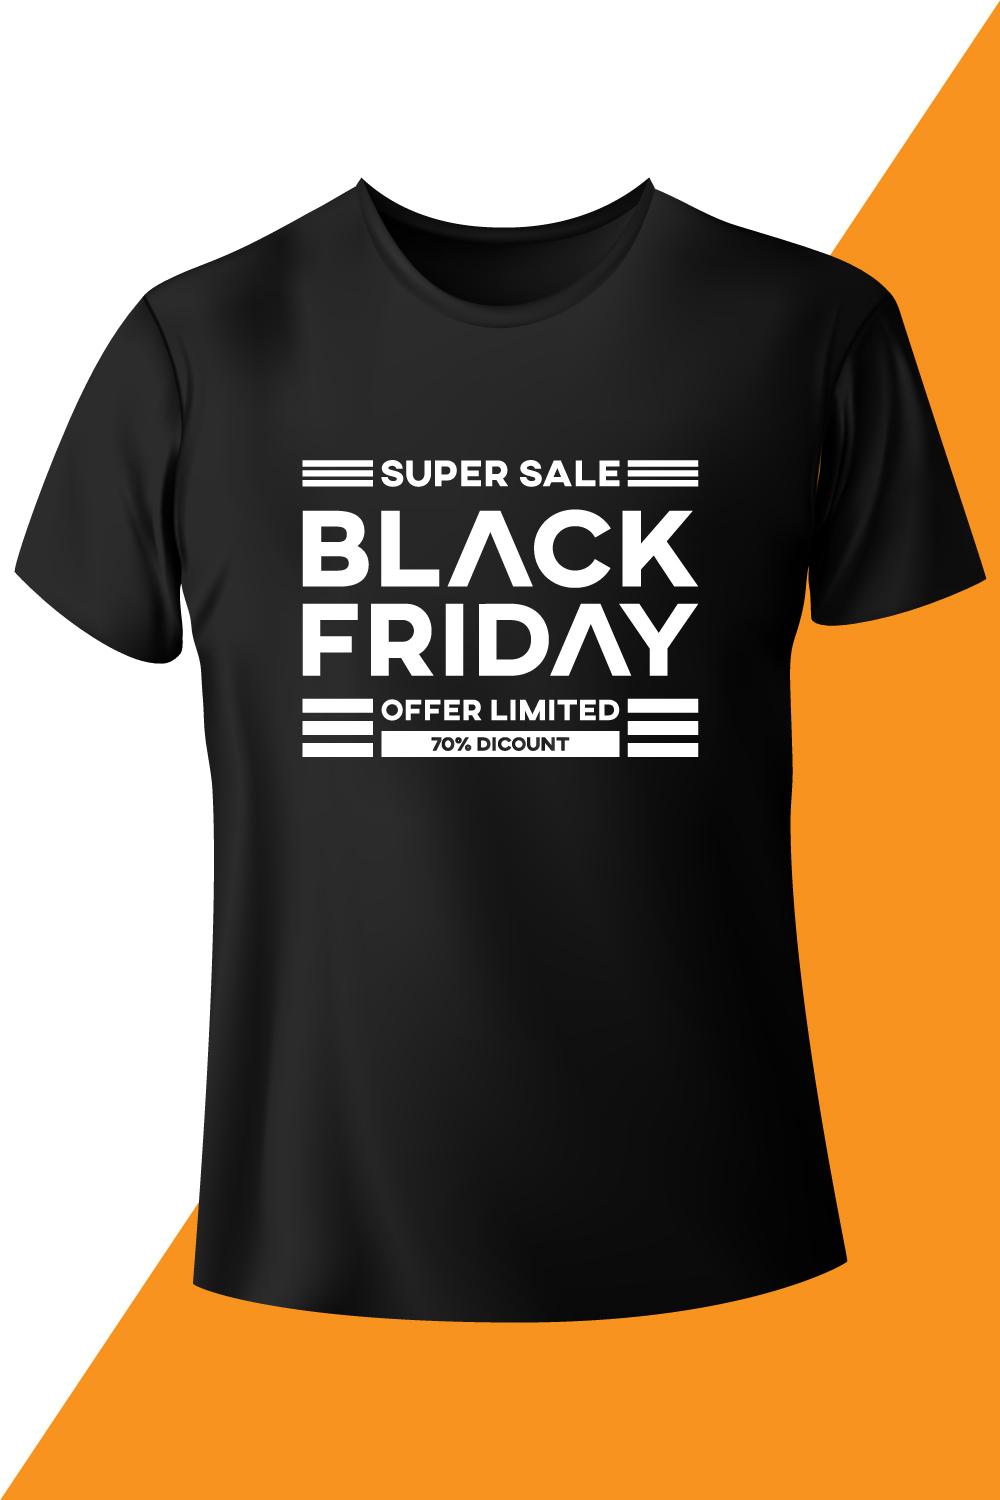 Image of a black t-shirt with a charming inscription Black Friday.